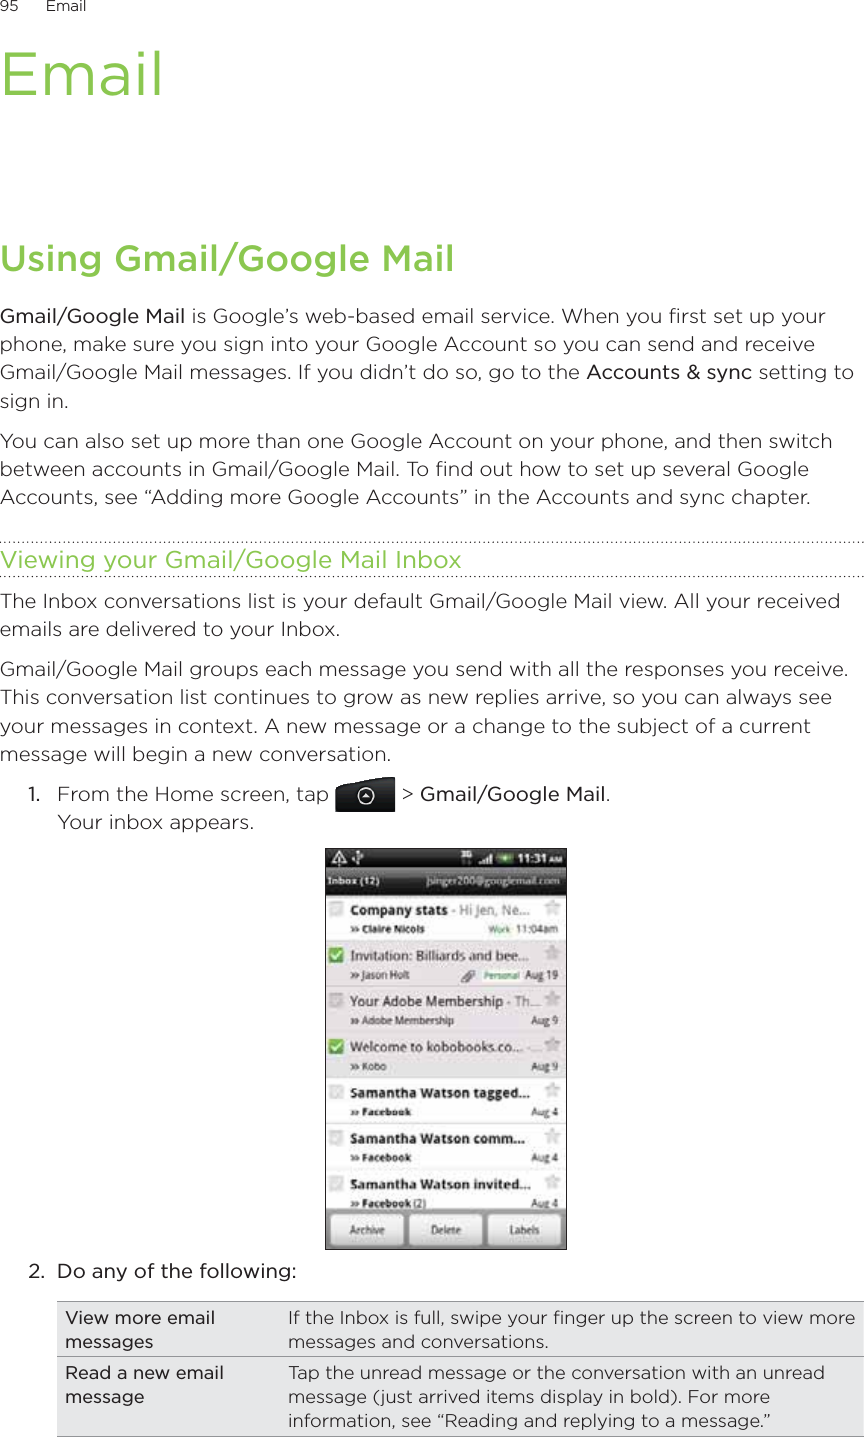 95      Email      EmailUsing Gmail/Google MailGmail/Google Mail is Google’s web-based email service. When you first set up your phone, make sure you sign into your Google Account so you can send and receive Gmail/Google Mail messages. If you didn’t do so, go to the Accounts &amp; sync setting to sign in.You can also set up more than one Google Account on your phone, and then switch between accounts in Gmail/Google Mail. To find out how to set up several Google Accounts, see “Adding more Google Accounts” in the Accounts and sync chapter.Viewing your Gmail/Google Mail InboxThe Inbox conversations list is your default Gmail/Google Mail view. All your received emails are delivered to your Inbox.Gmail/Google Mail groups each message you send with all the responses you receive. This conversation list continues to grow as new replies arrive, so you can always see your messages in context. A new message or a change to the subject of a current message will begin a new conversation.1.  From the Home screen, tap   &gt; Gmail/Google Mail. Your inbox appears.2.  Do any of the following:View more email messagesIf the Inbox is full, swipe your finger up the screen to view more messages and conversations.Read a new email messageTap the unread message or the conversation with an unread message (just arrived items display in bold). For more information, see “Reading and replying to a message.”